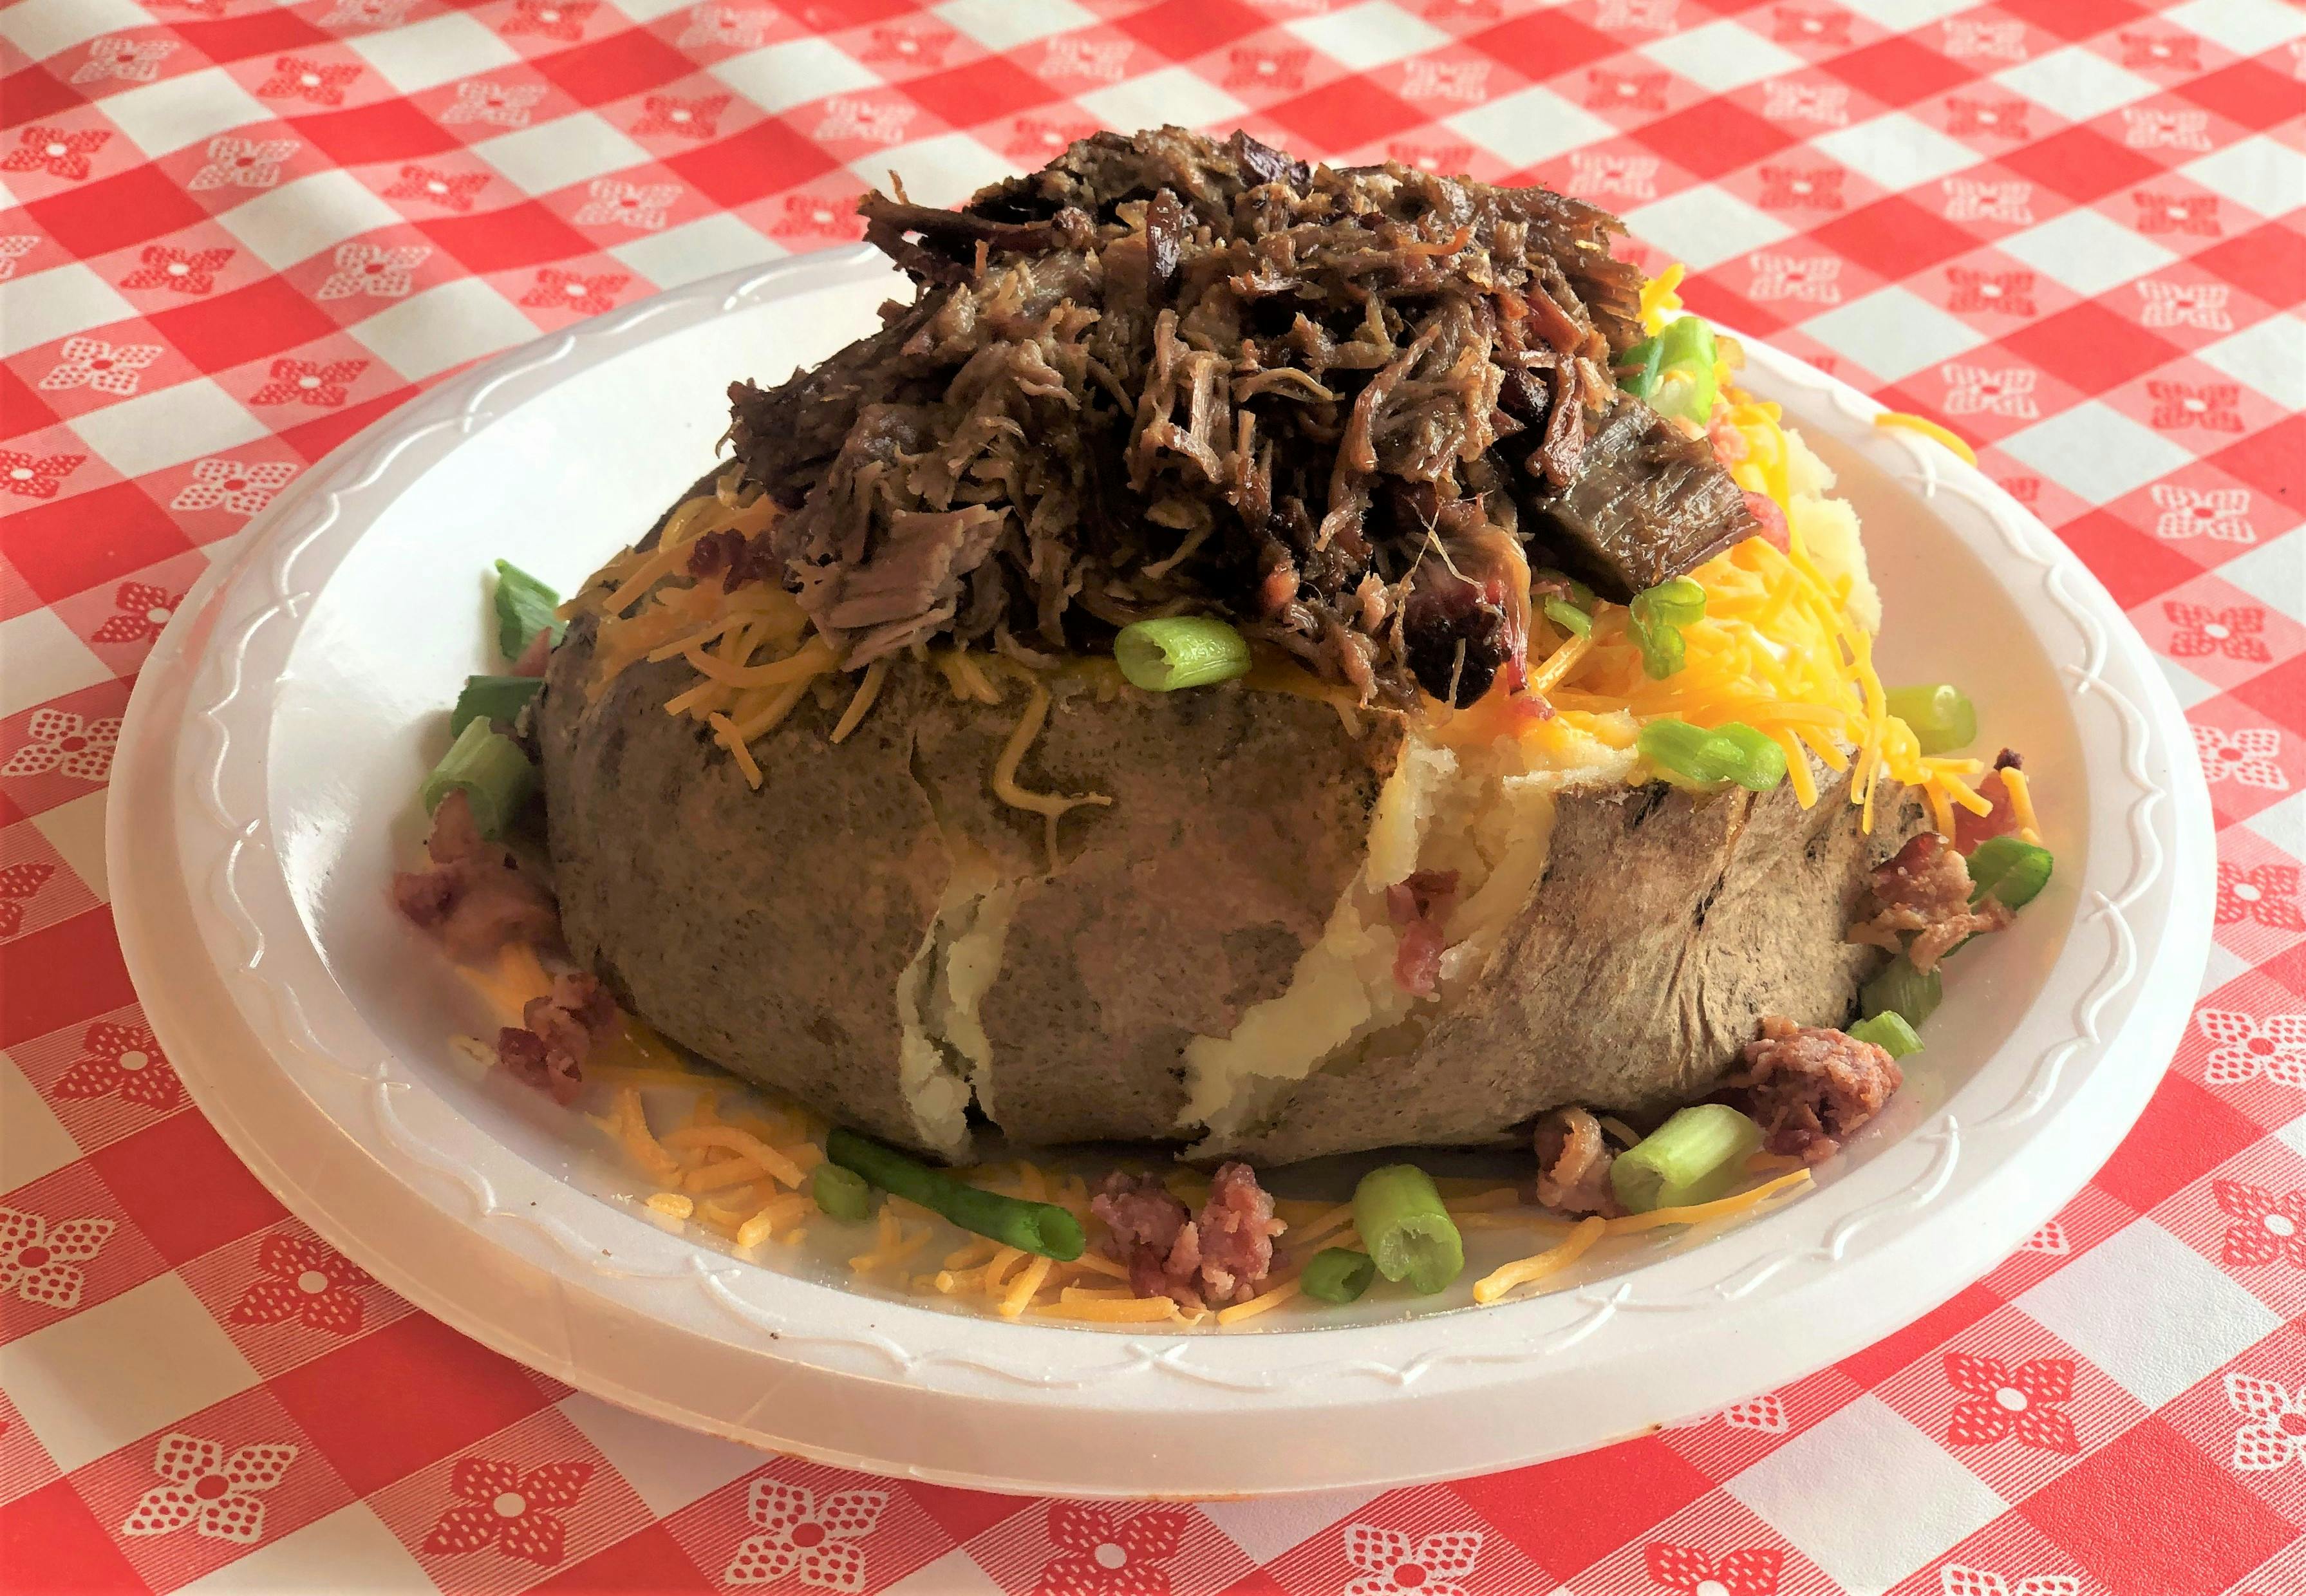 Loaded Taters with Meat from Hog Wild Pit BBQ & Catering in Lawrence, KS